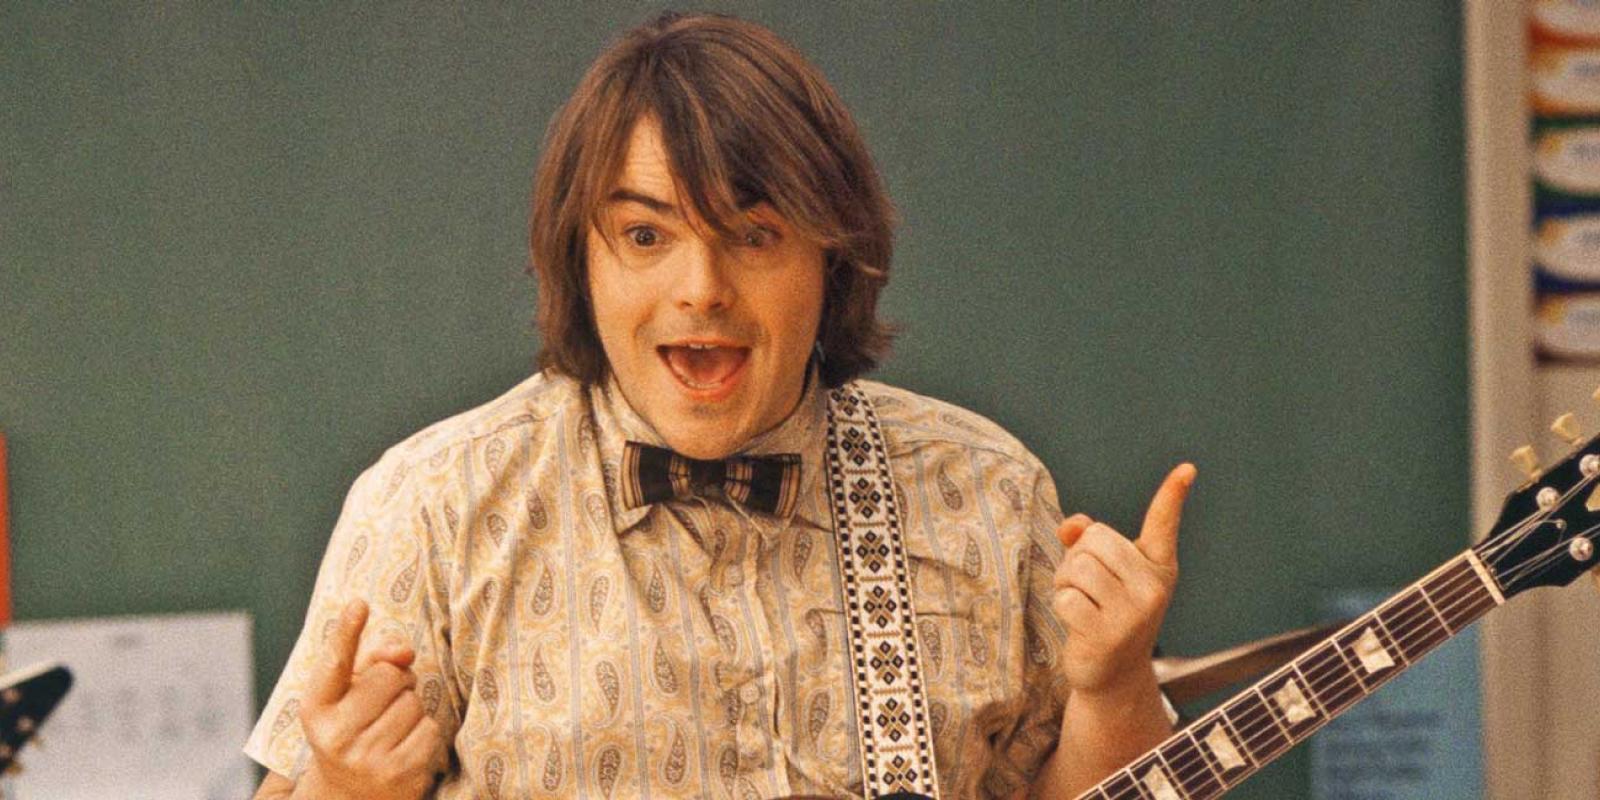 15 Years Later: The Oral History of 'School of Rock'